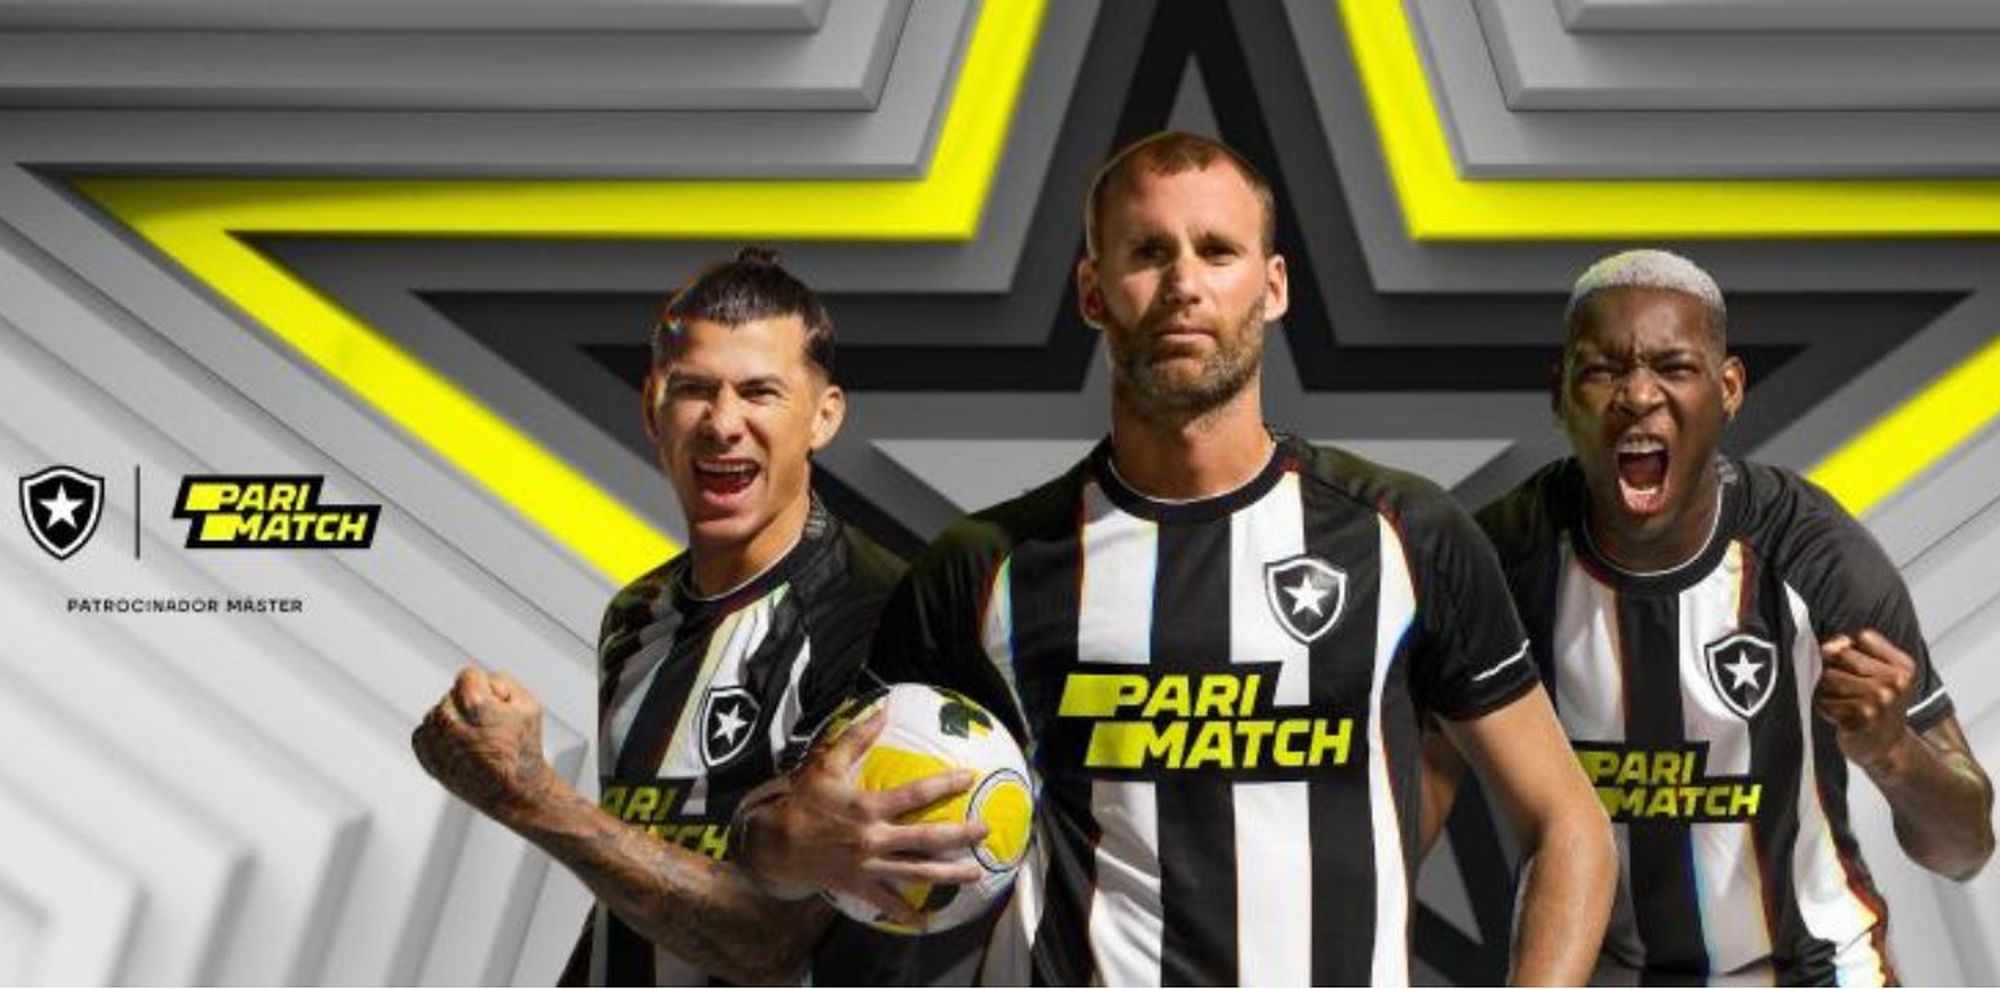 Players from Botafogo wearing Parimatch jerseys.